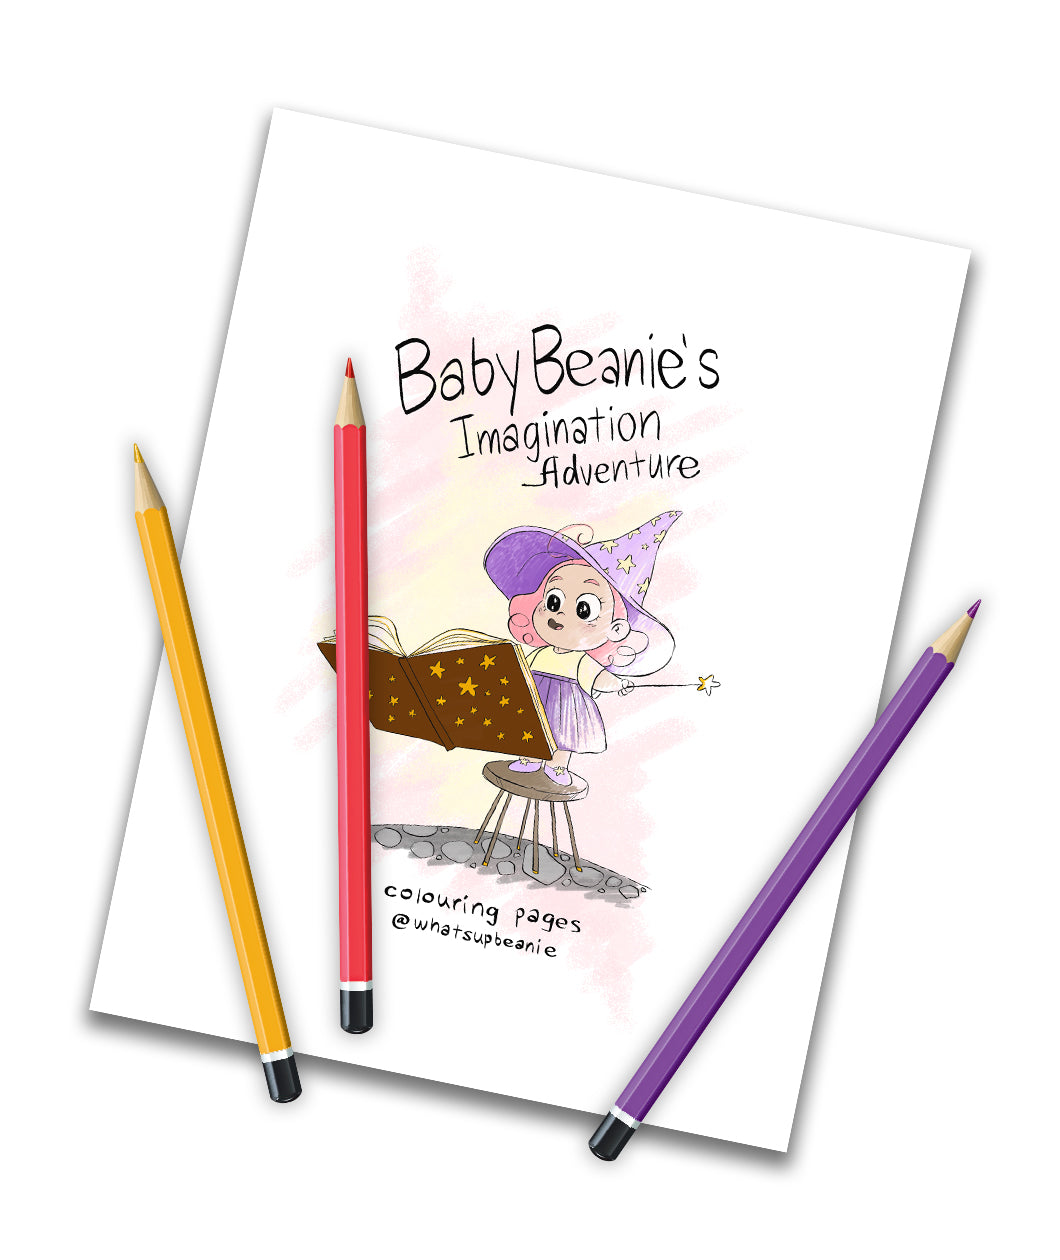 Three colored pencils are strewn across a page of paper that says "Baby Beanie's Imagination Adventure" "Colouring Pages @whatsupbeanie." On the paper is an illustration of a girl in purple and yellow wizard garb, a floating magical book in front of her.